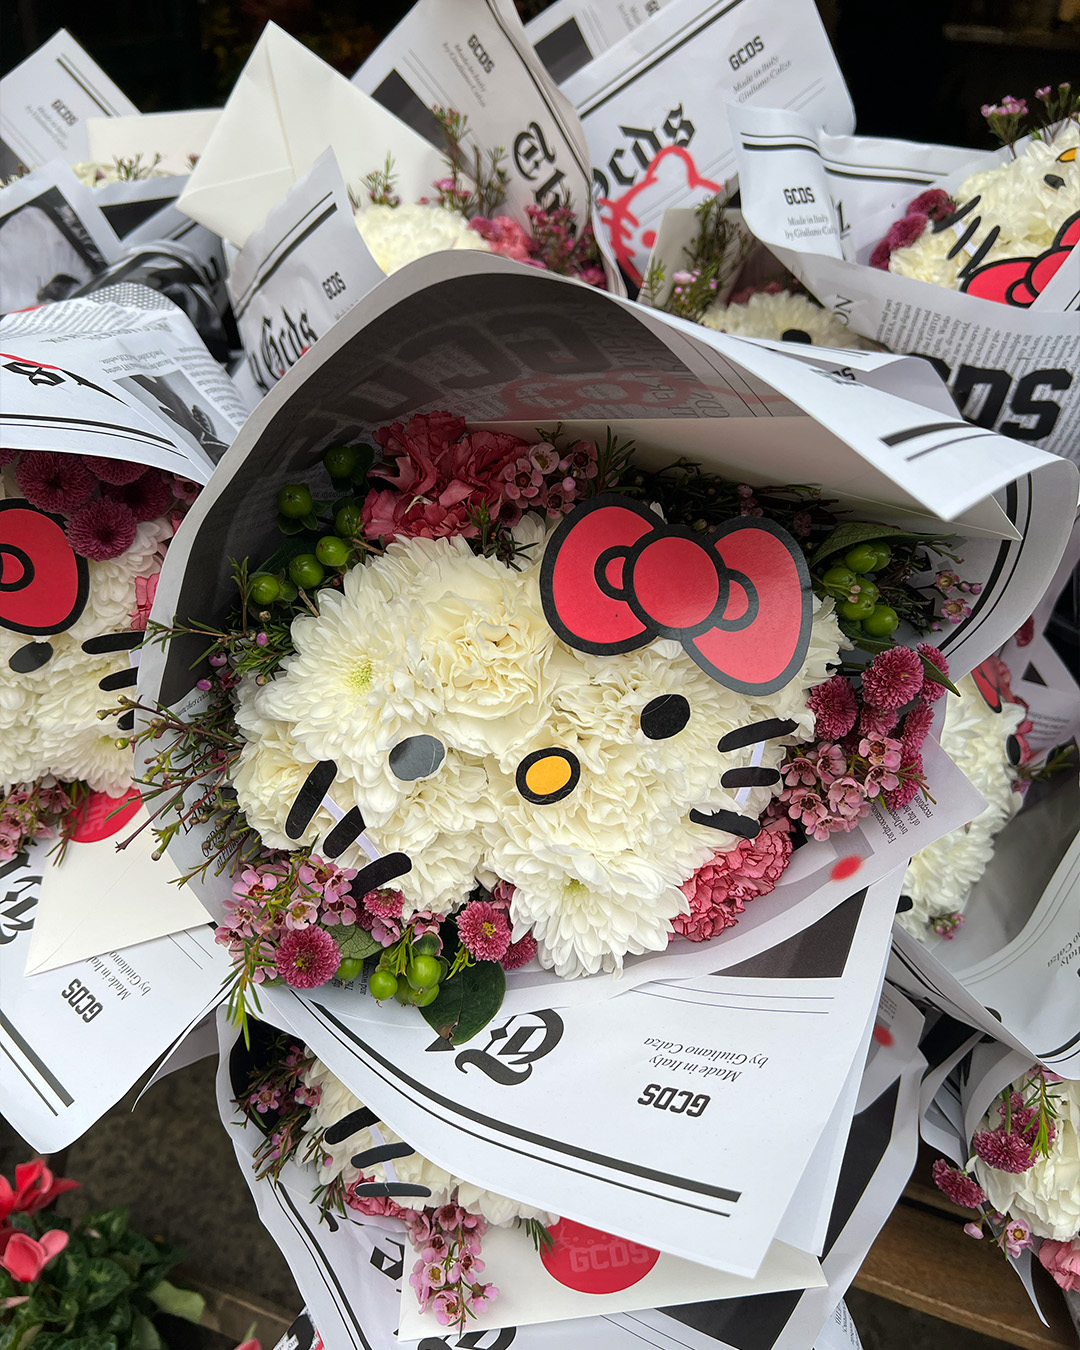 GCDS x Hello Kitty is a Sweet Surprise - V Magazine